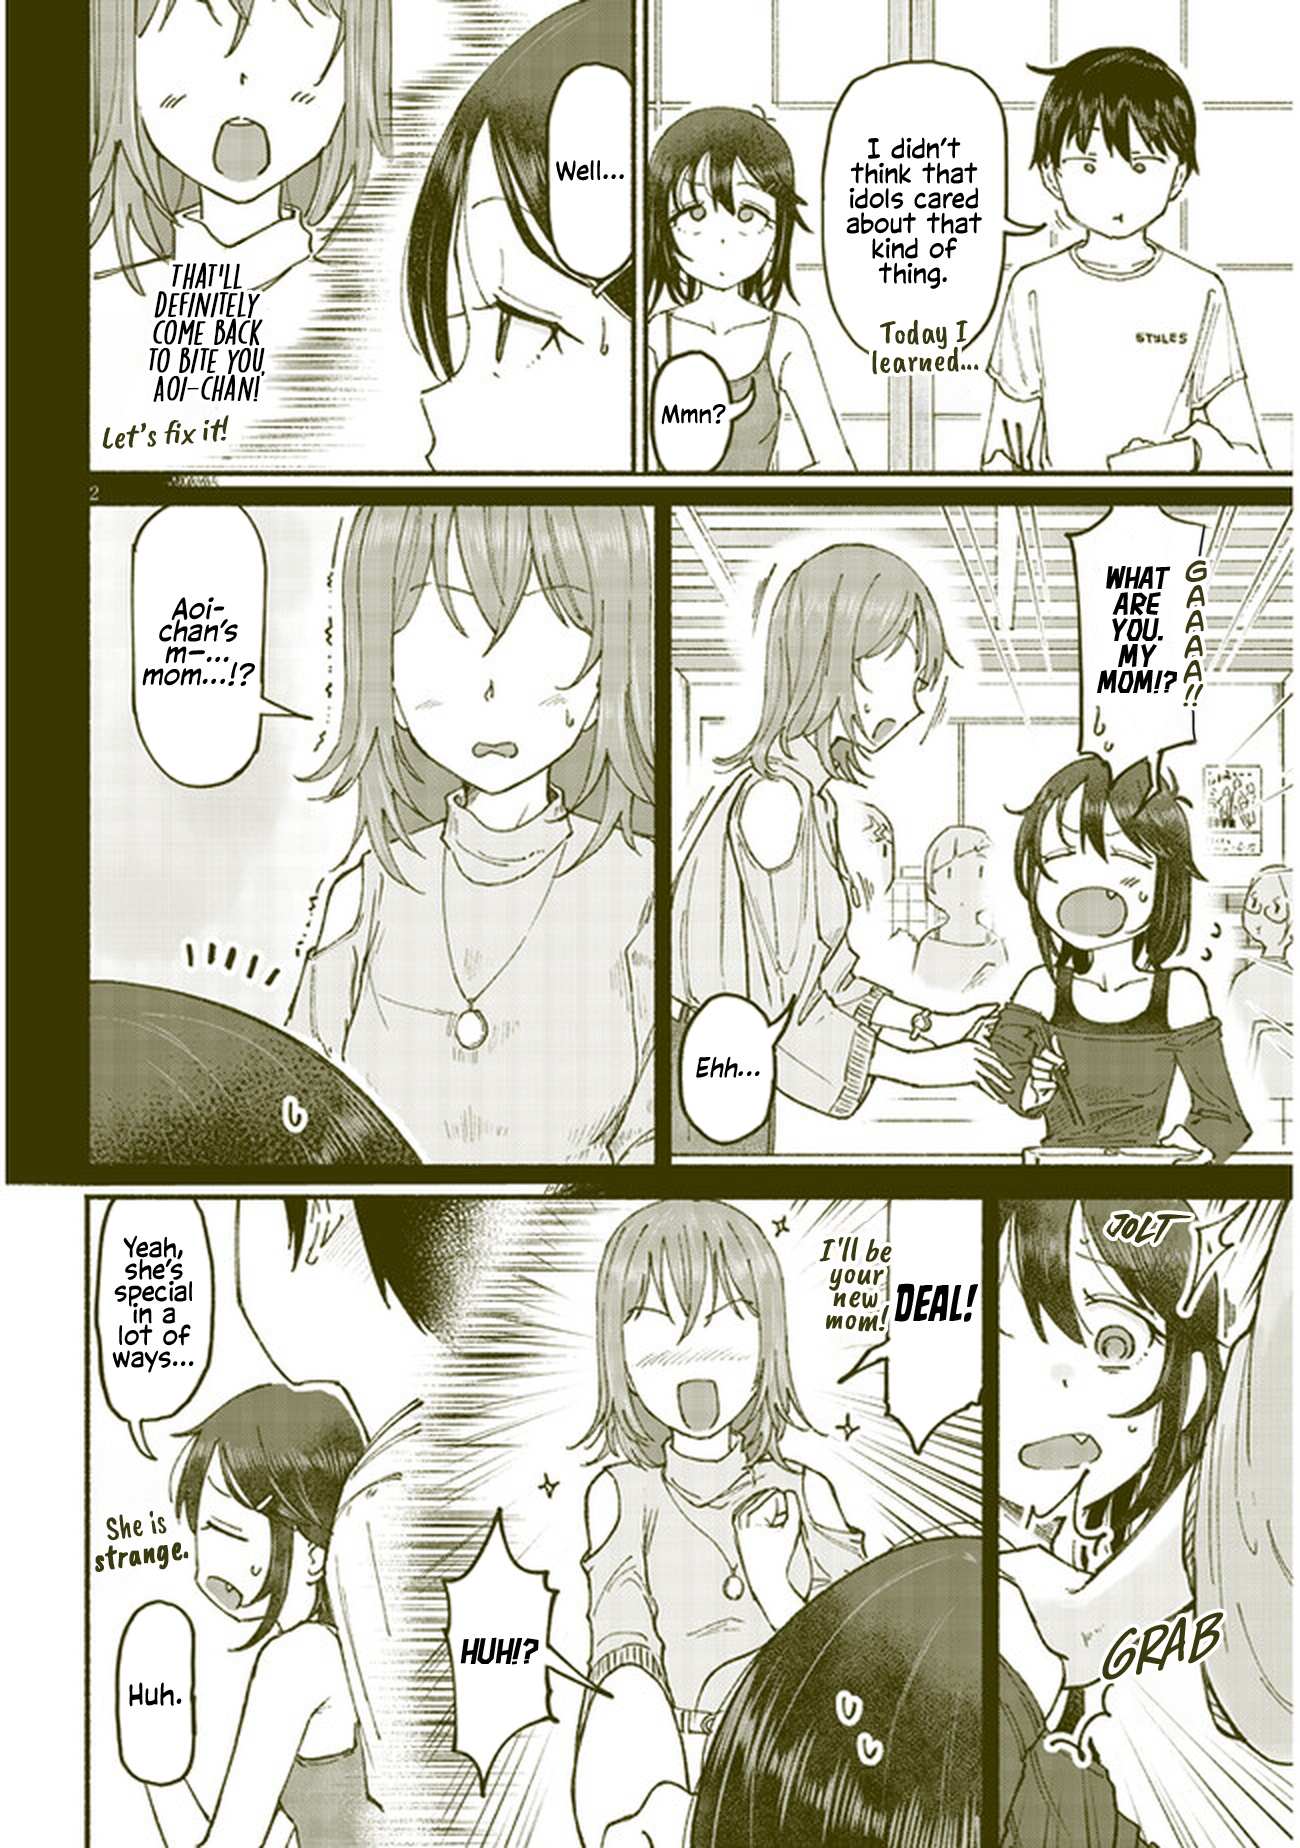 My Cousin - chapter 11.5 - #2